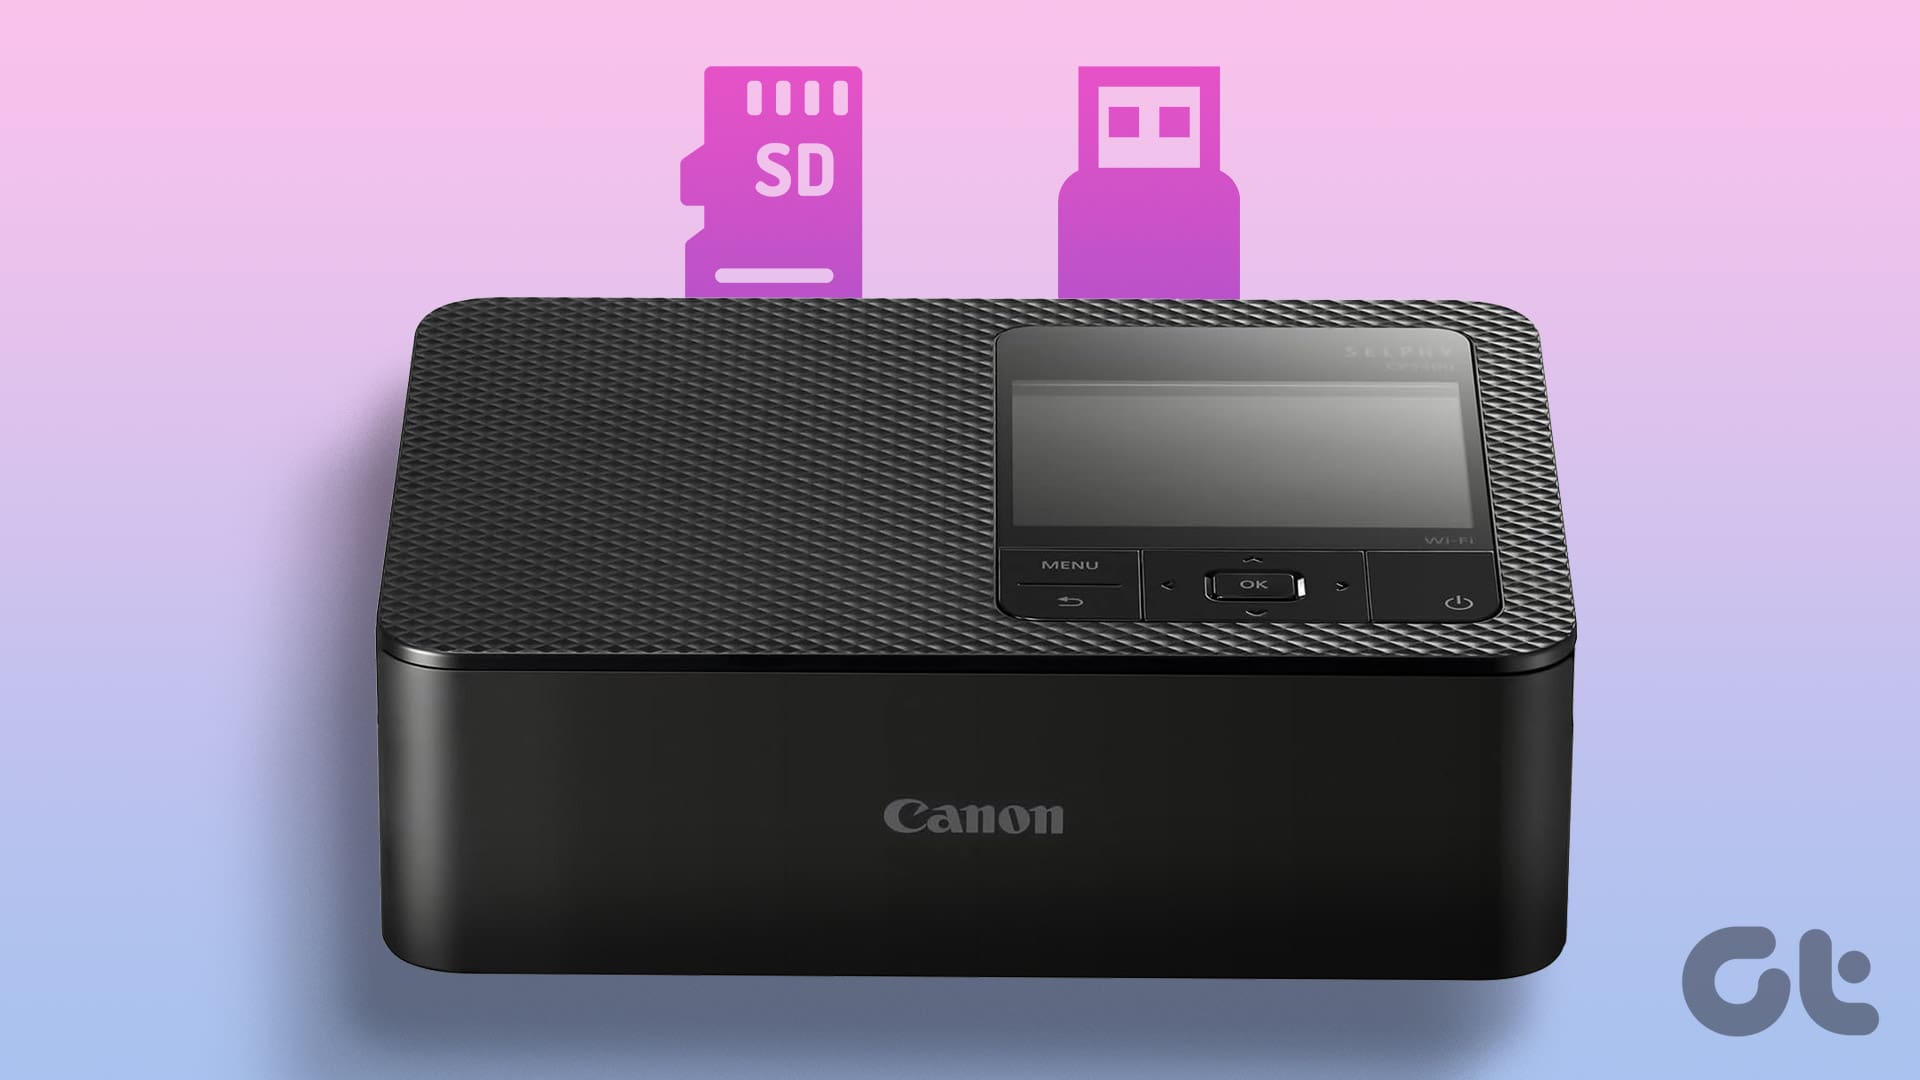 Top 4 Photo Printers With SD Card Support